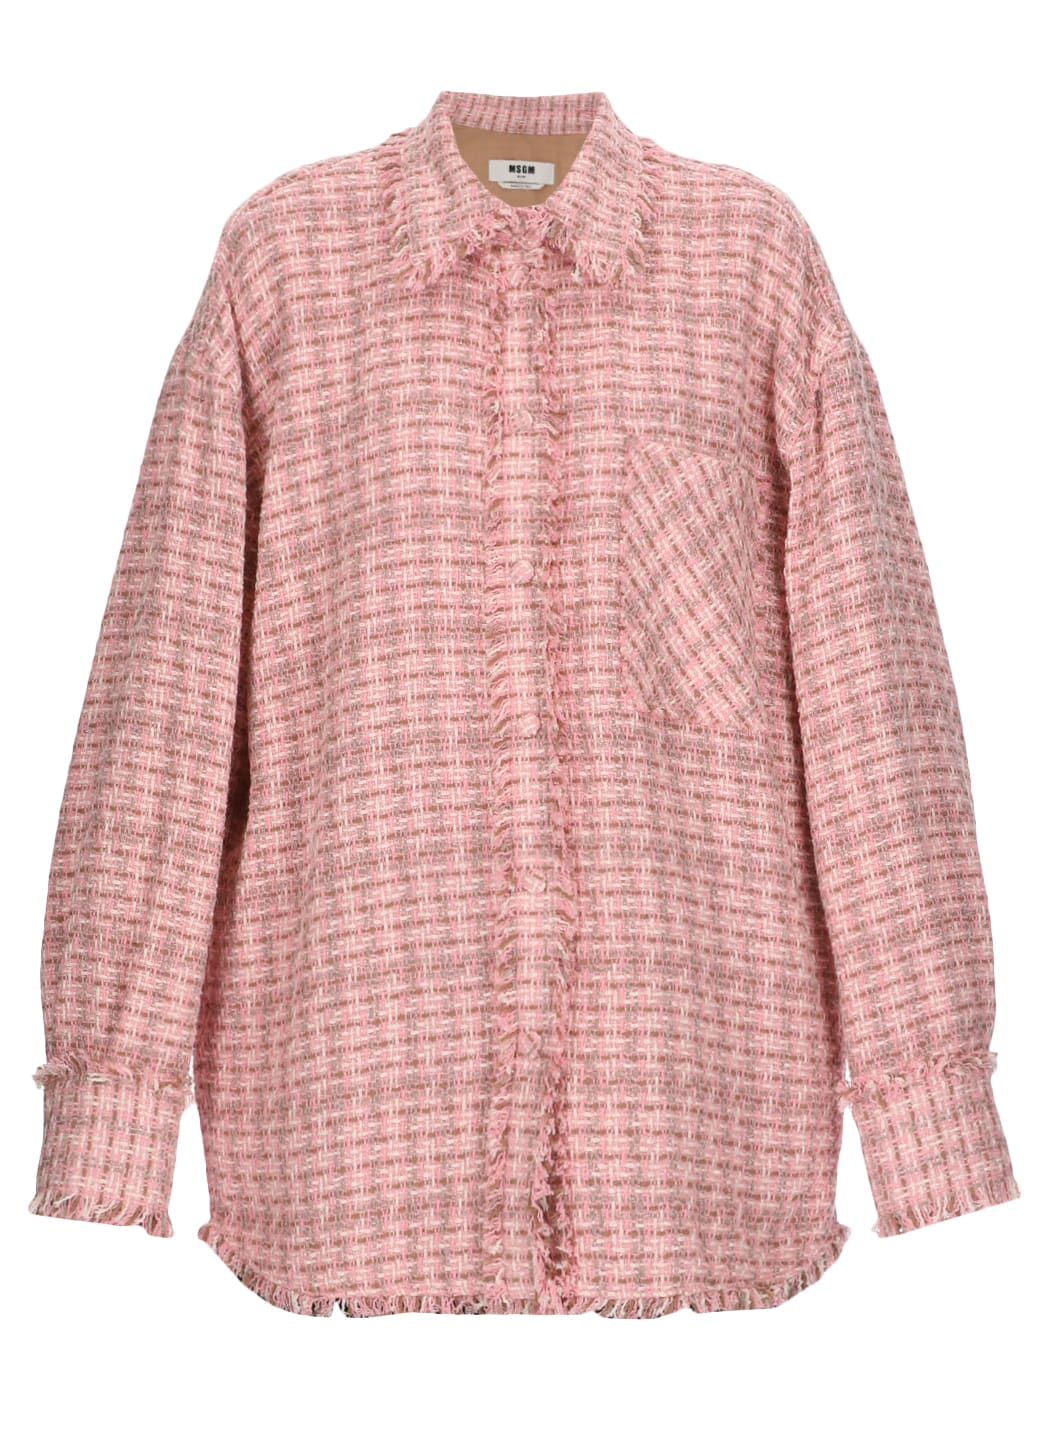 MSGM Tweed Shirt With Fringes